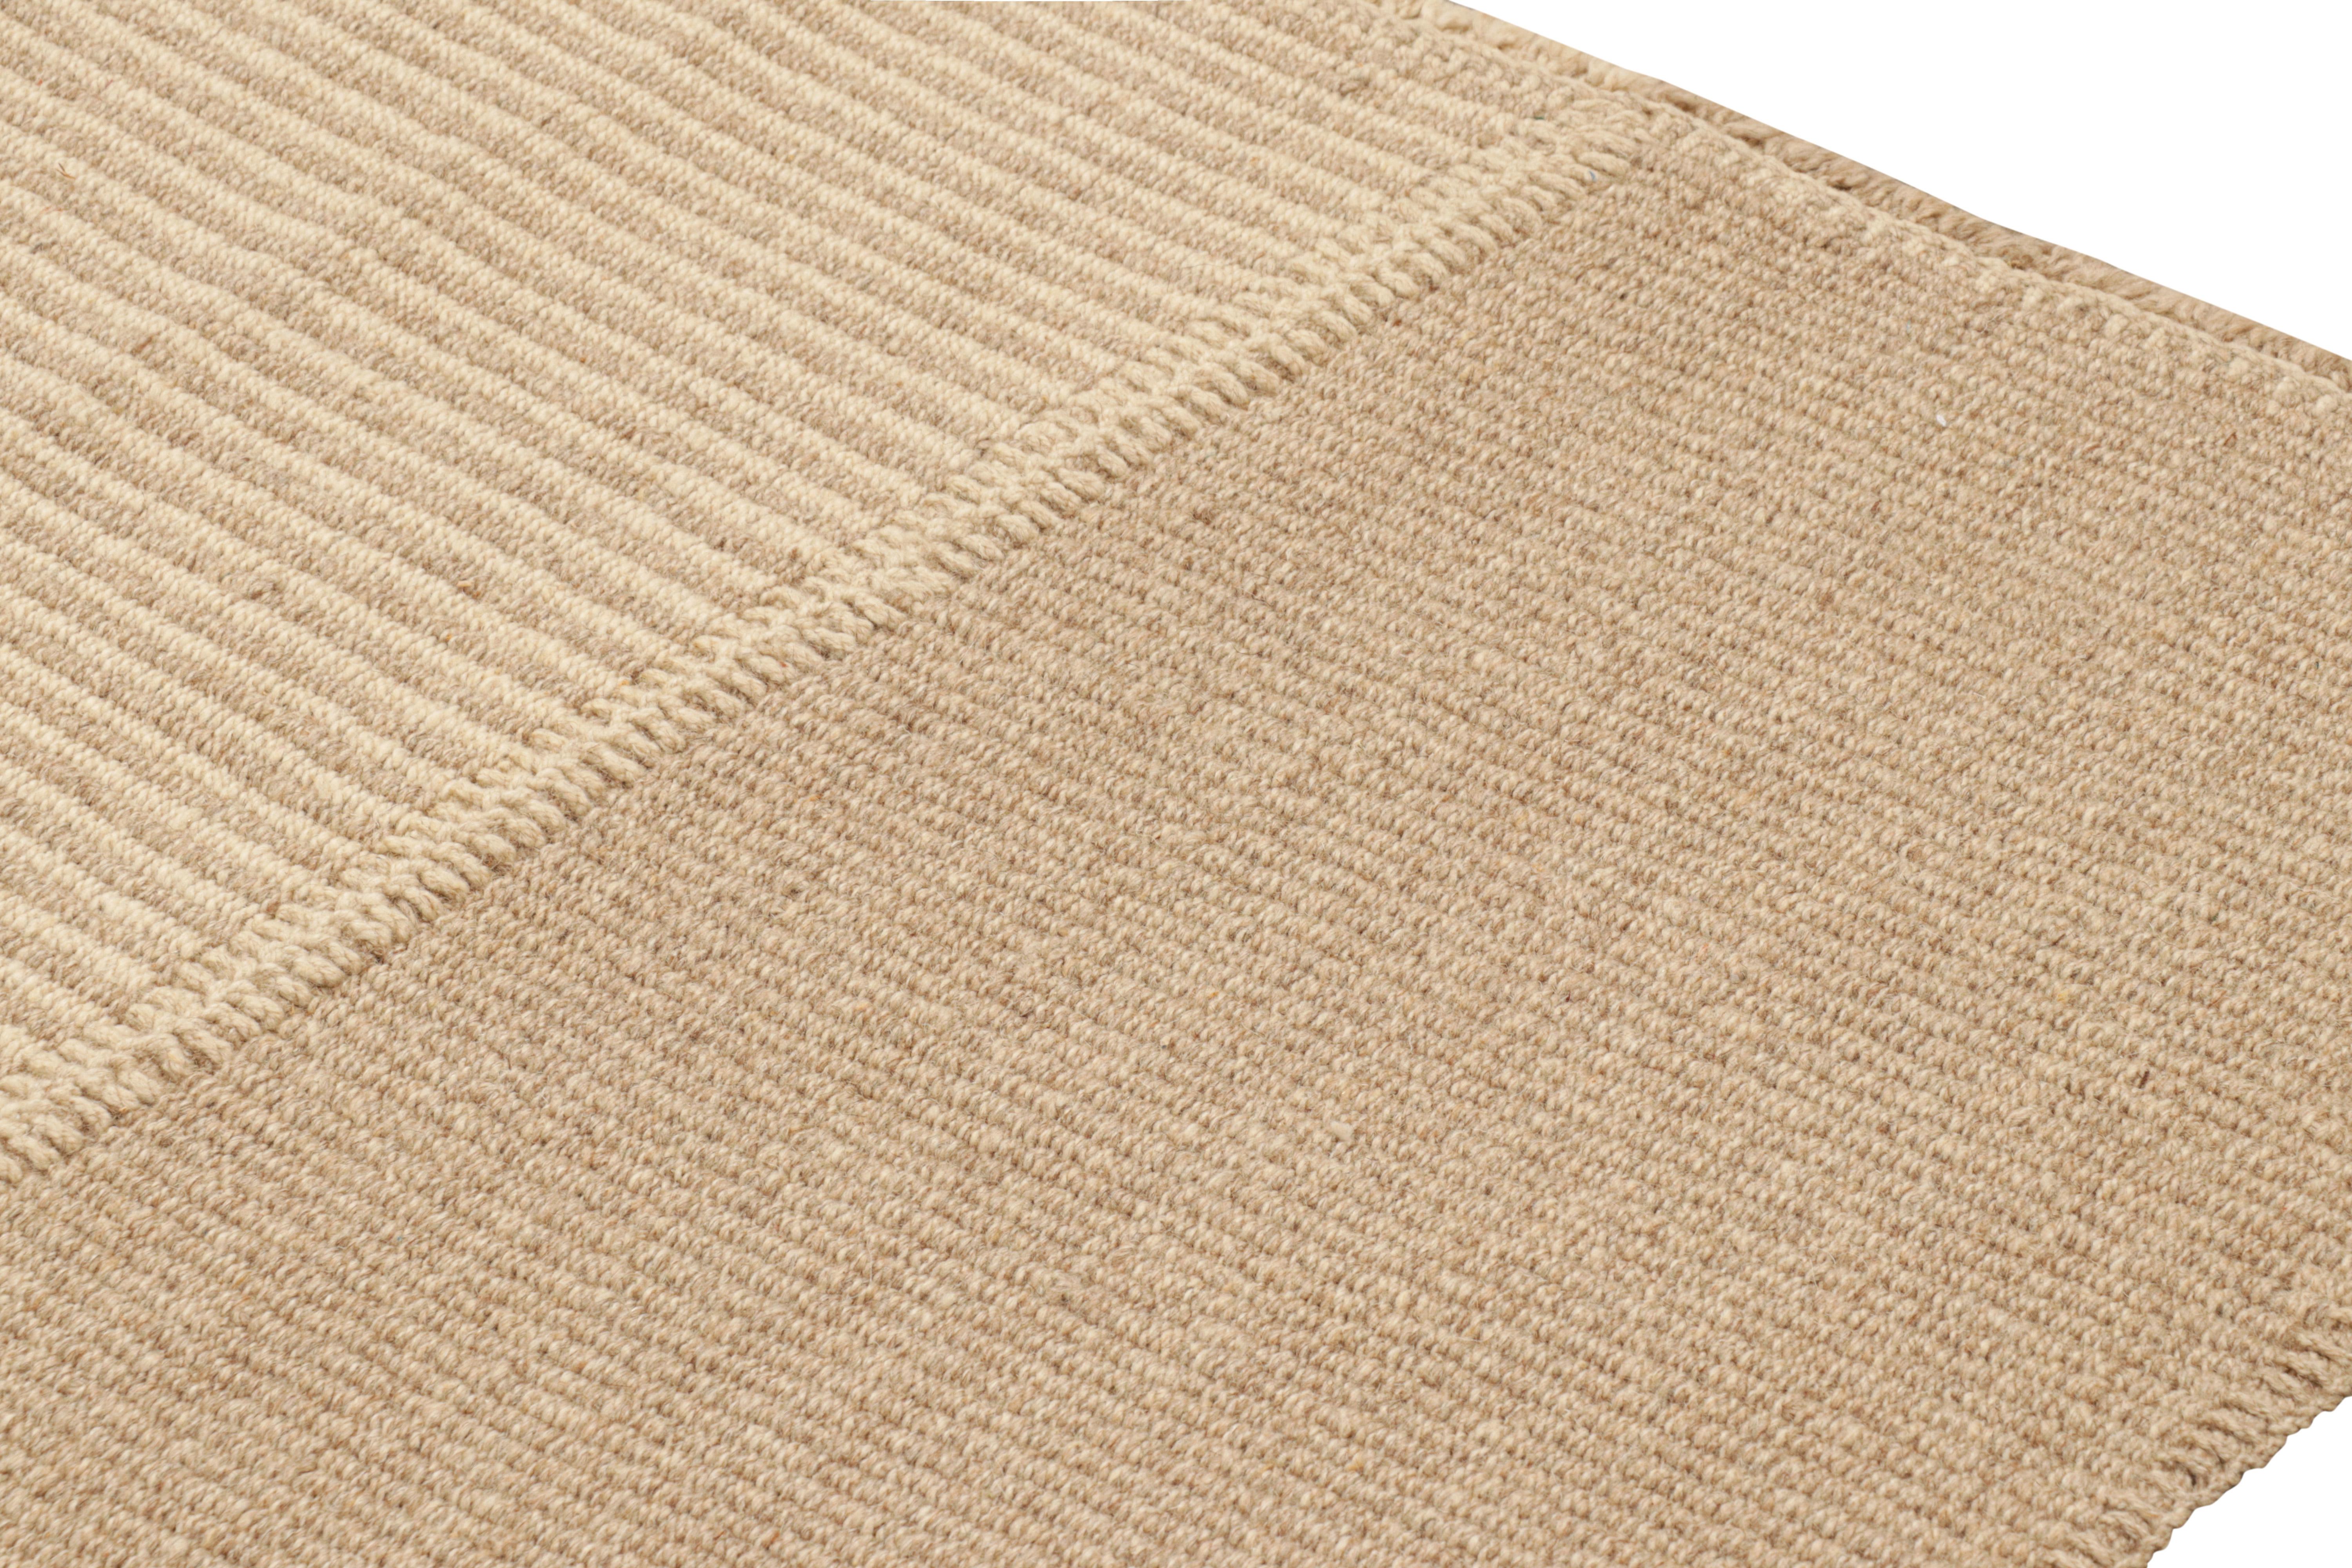 Modern Rug & Kilim’s Oversized Contemporary Kilim in Brown and Beige Textural Stripes For Sale